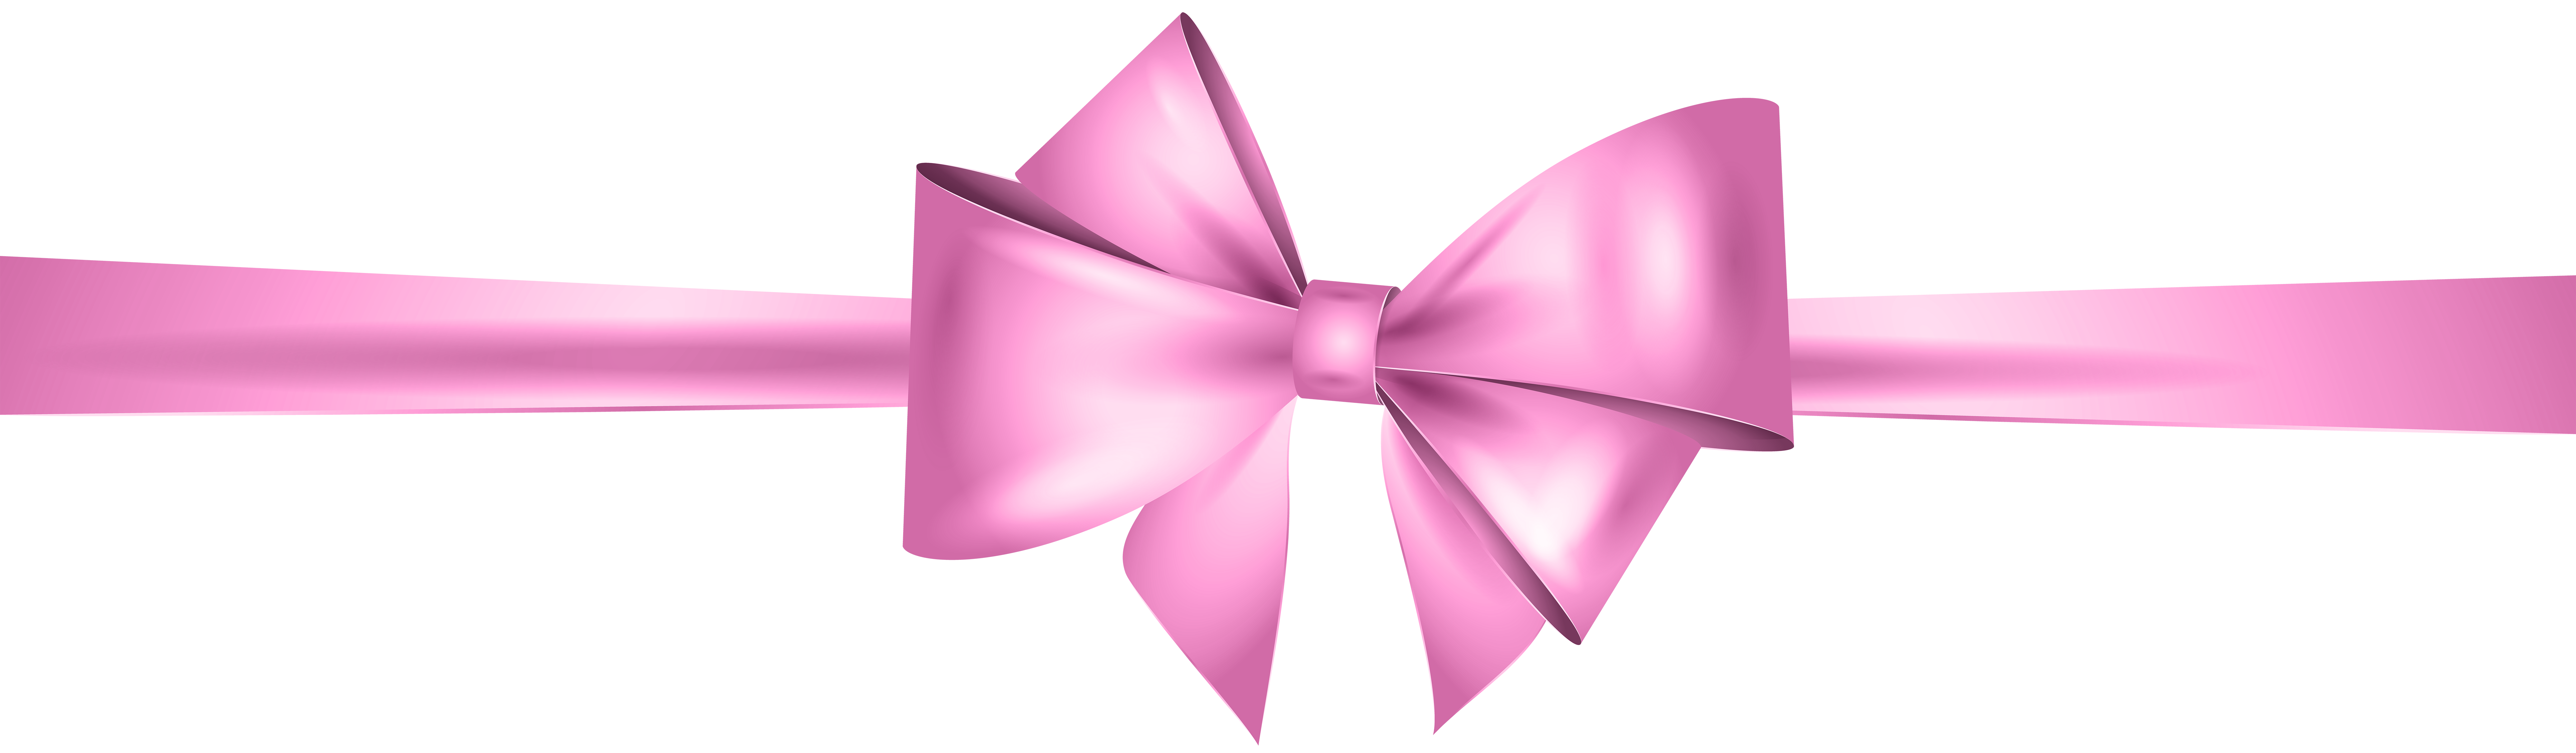 Pink Bow PNG Clip Art | Gallery Yopriceville - High-Quality Images and